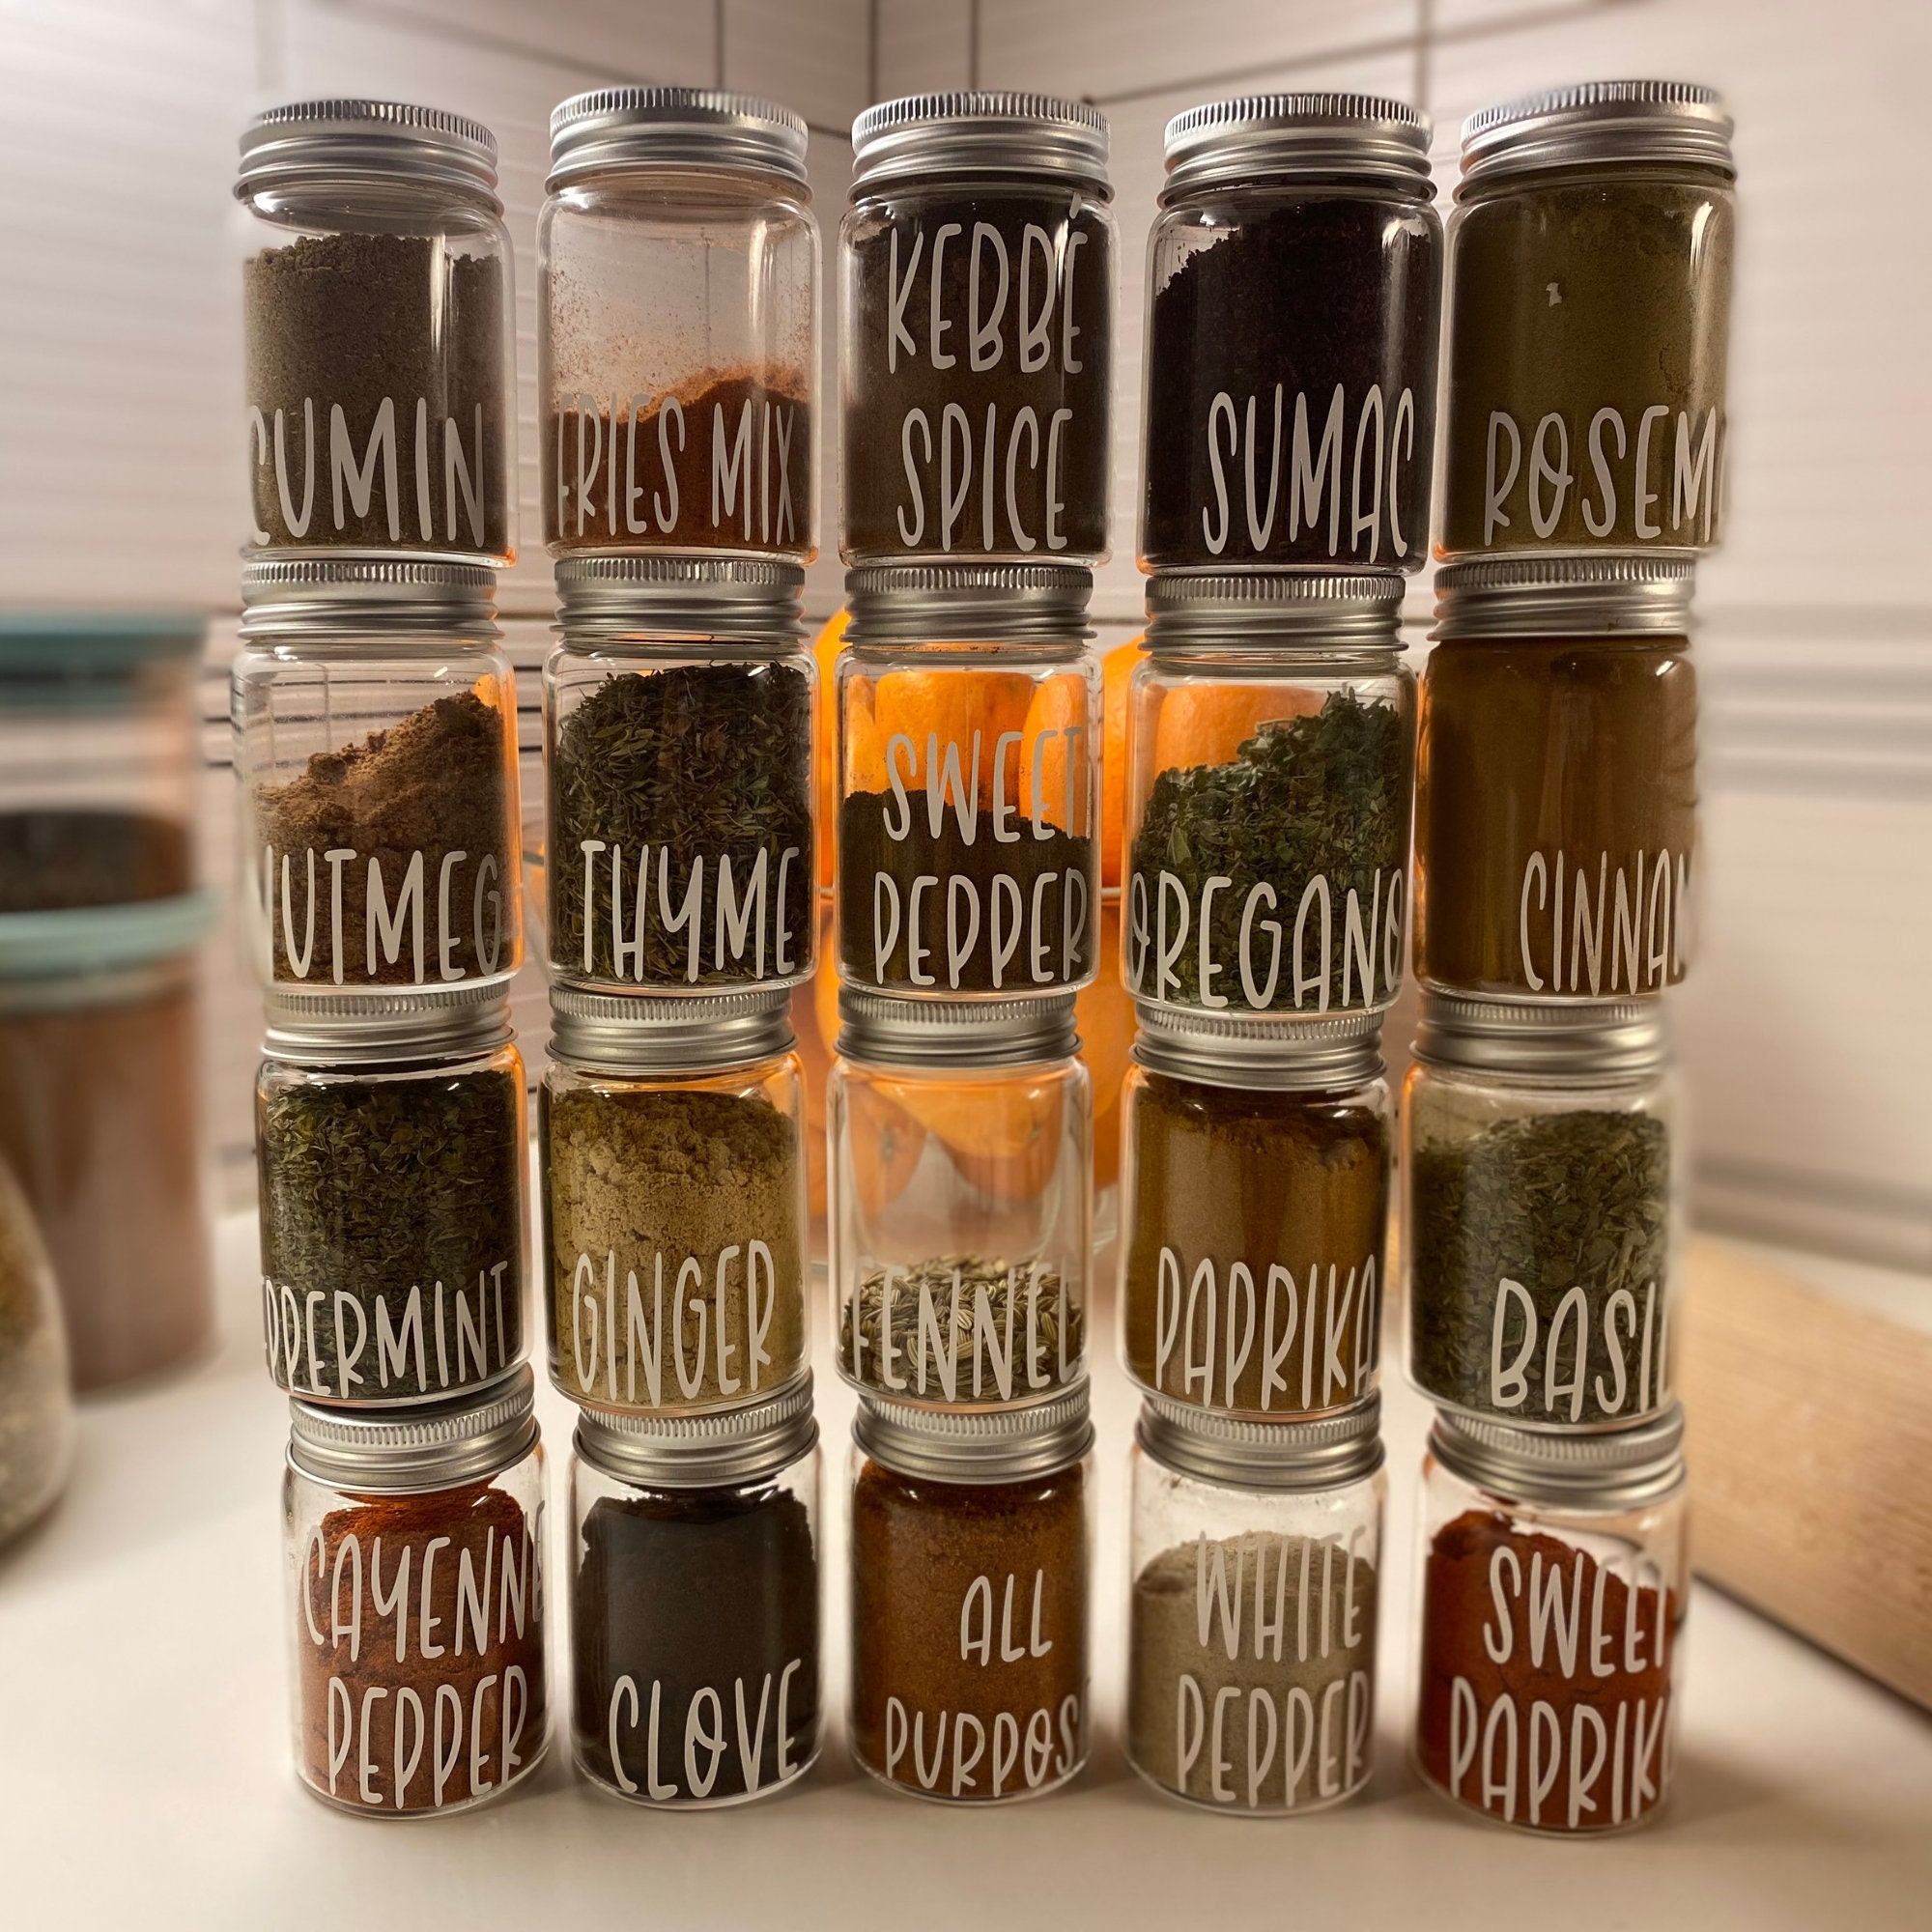 Small spice jar, colors: beige, green, direct position, on kitchen